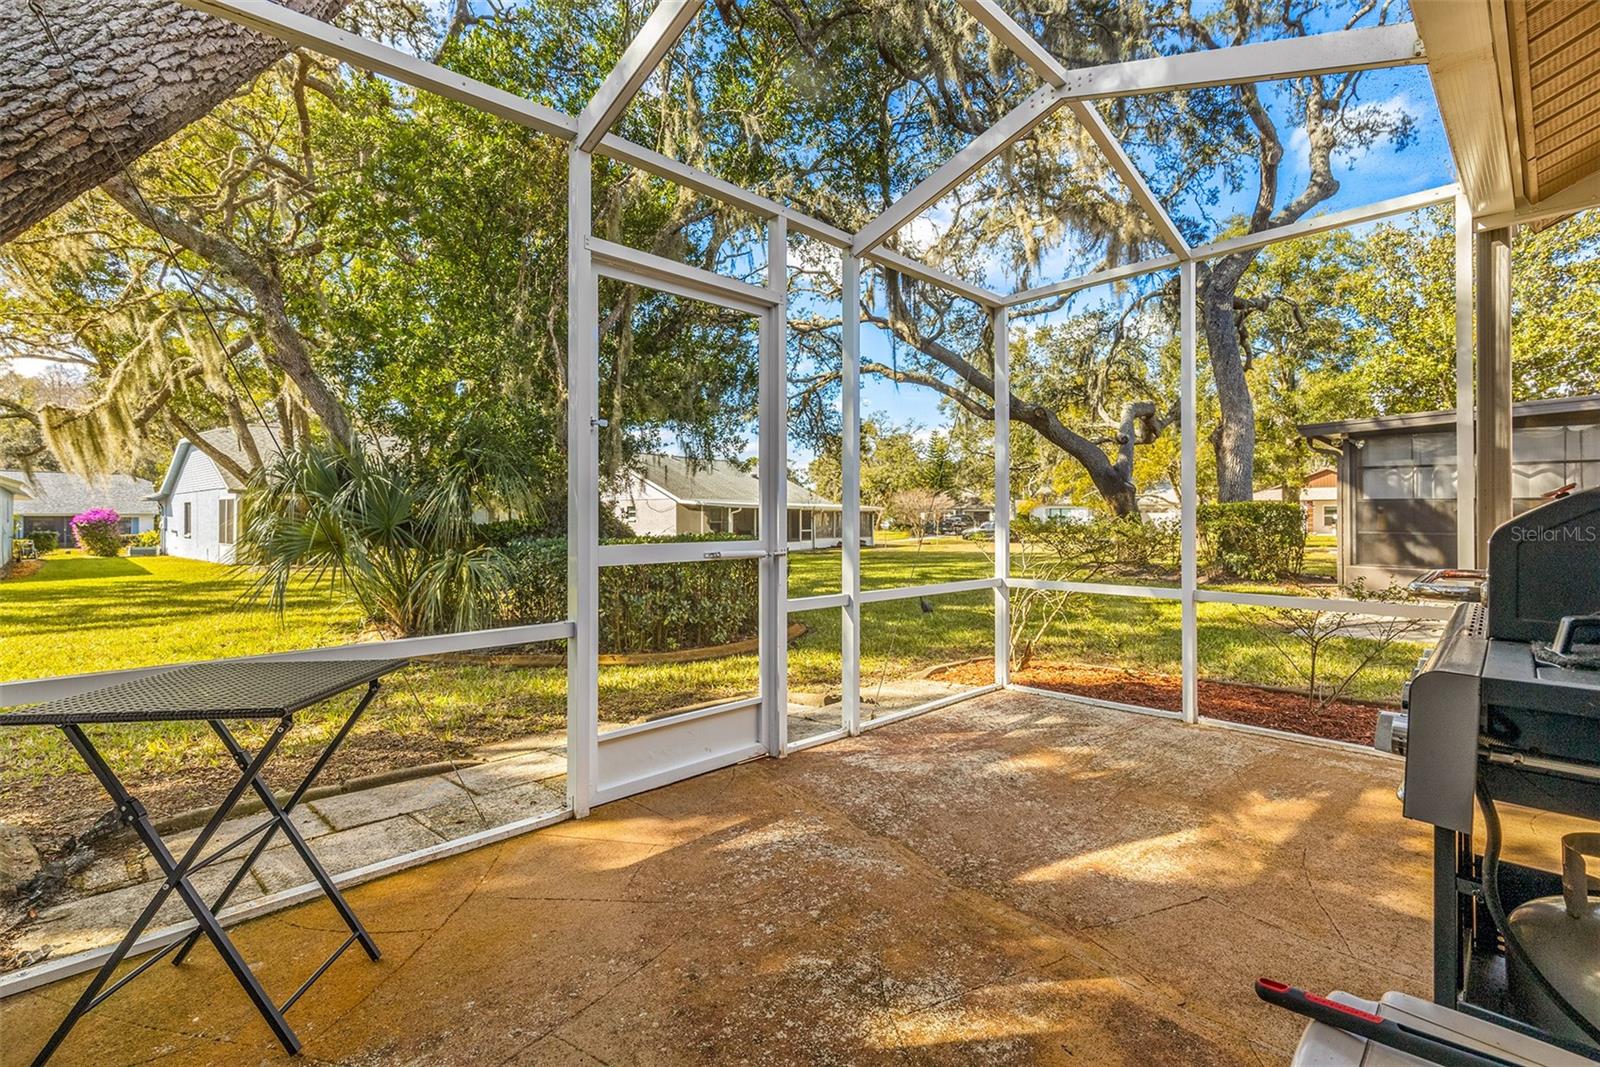 Separate Screened in lanai!  Great for your BBQ or enjoying the perfect Florida weather!